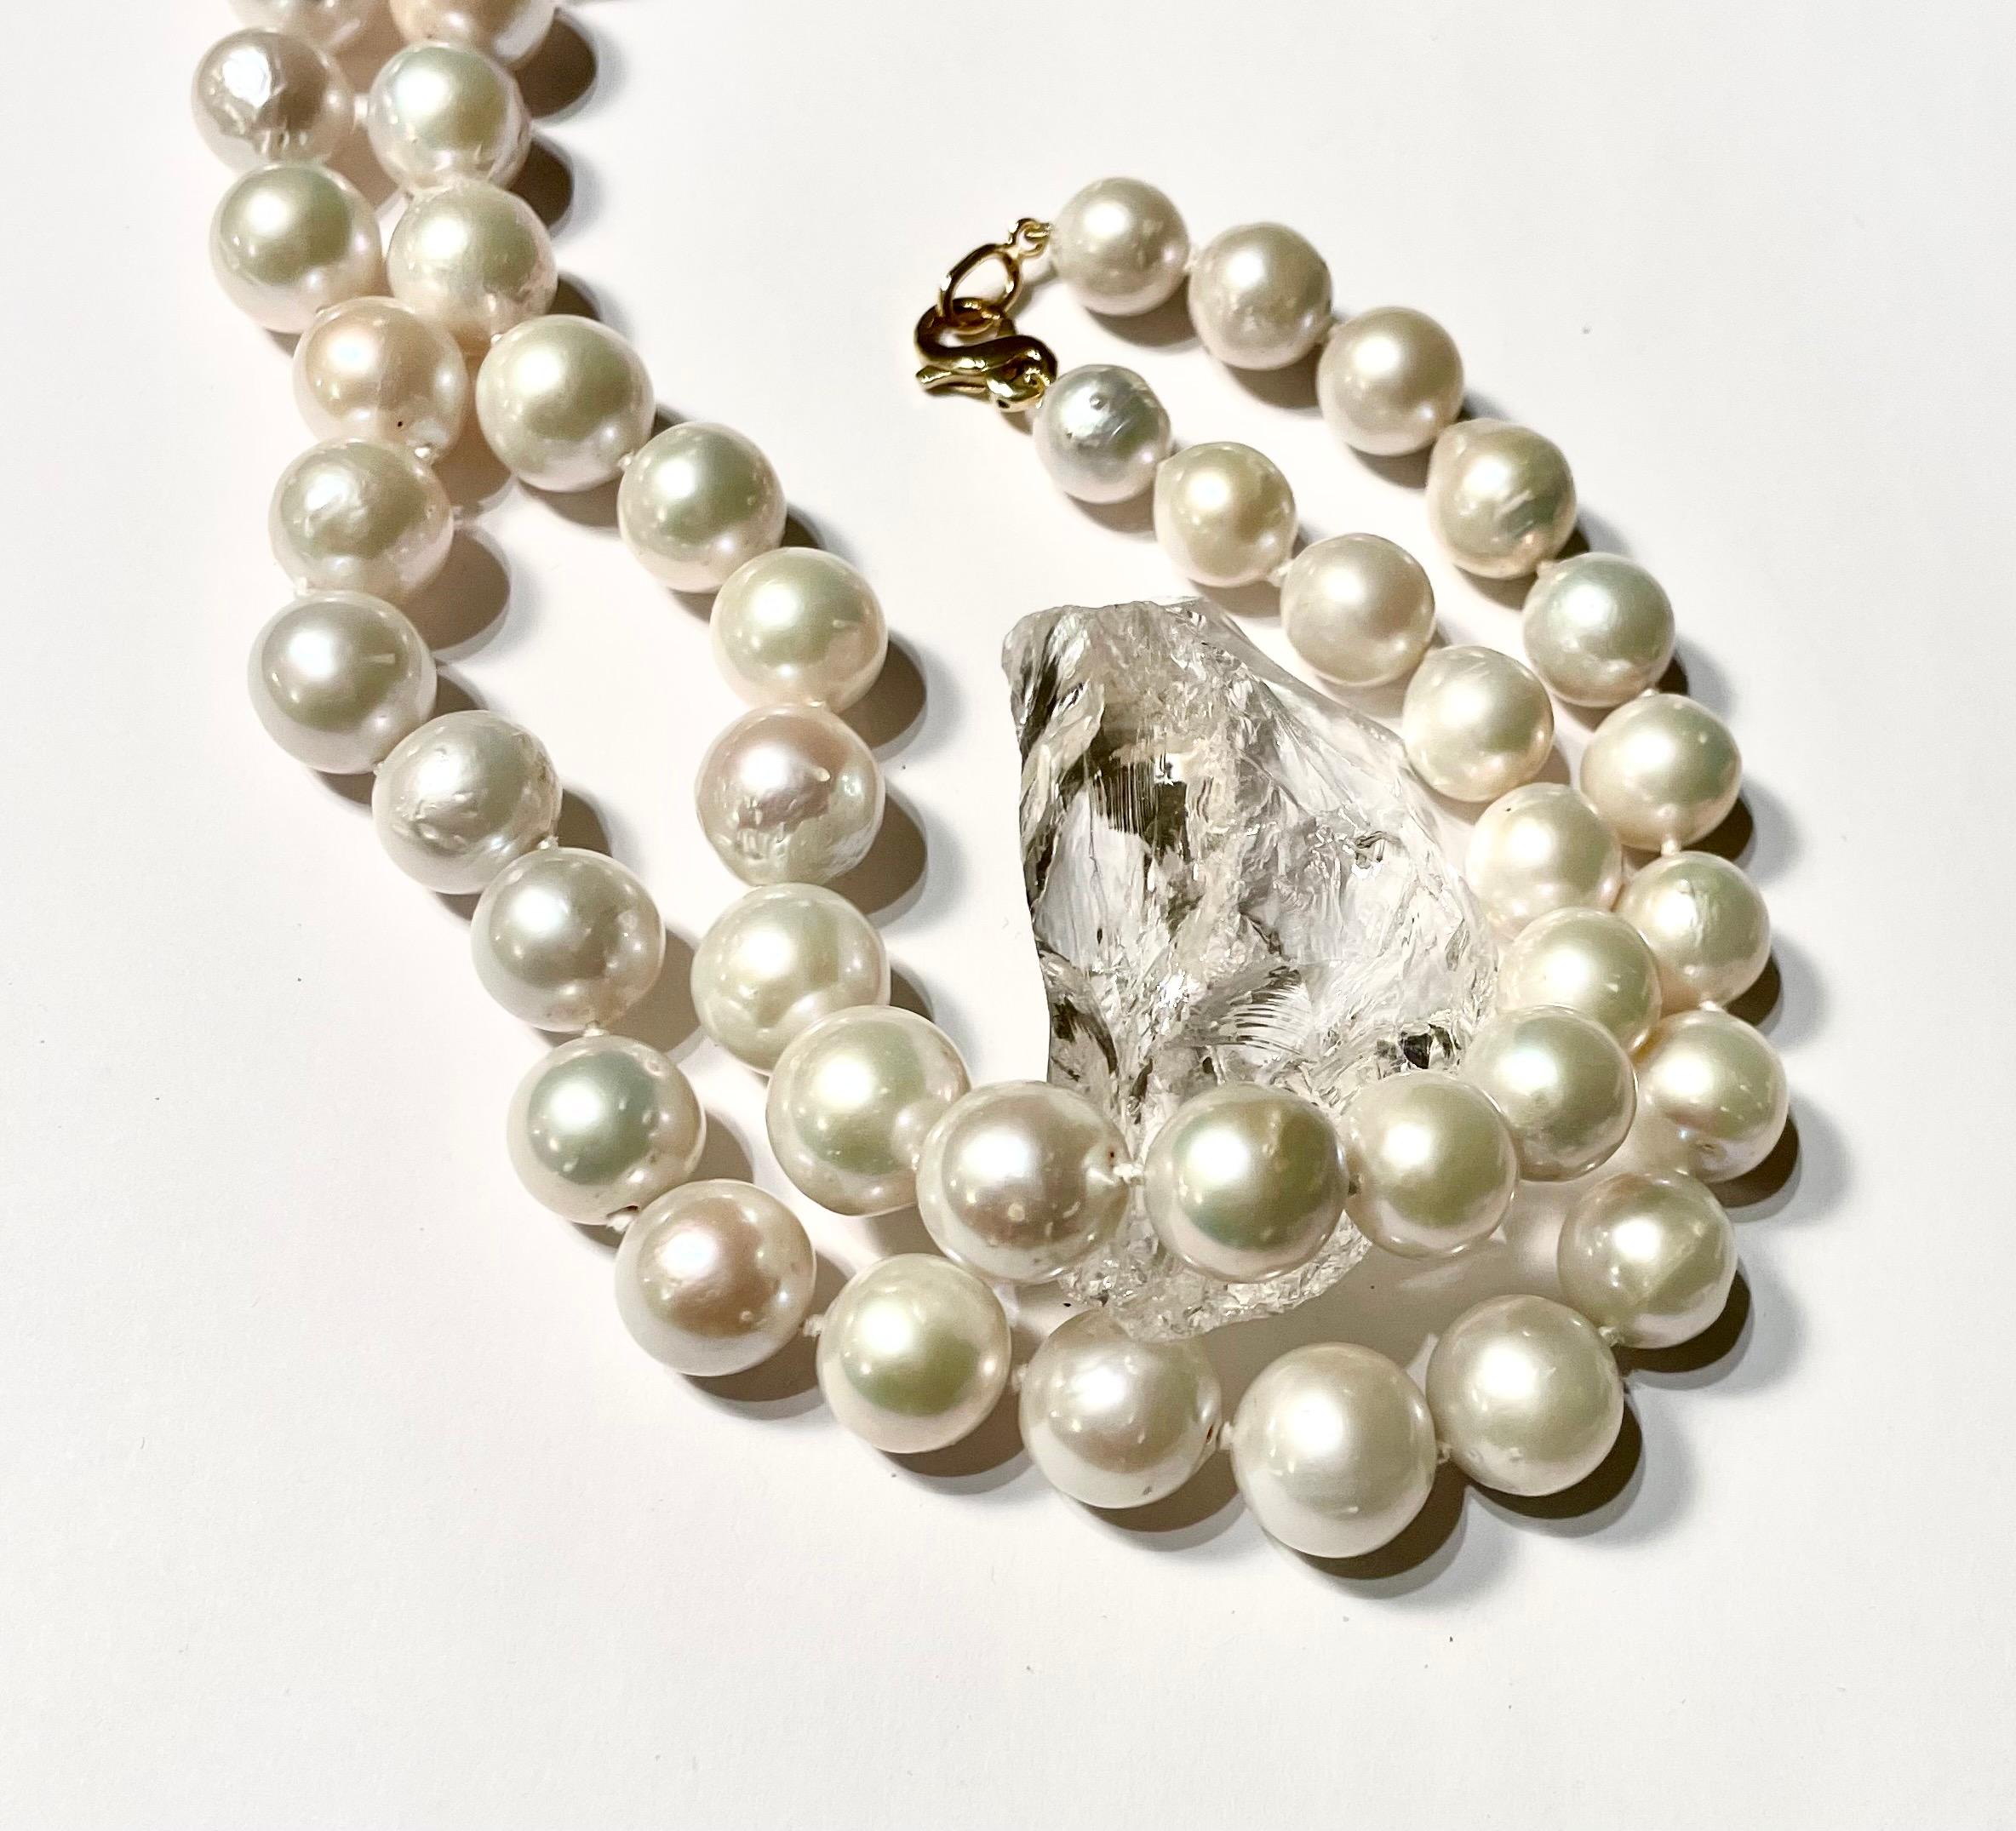 Description
White round freshwater pearls 11.5 to 14.5mm, 14k yellow gold. Can be doubled.
Item # N2445

Materials and Weight
White round freshwater pearls, 11.5 to 14.5mm
14k yellow gold.

Dimension
Necklace length: 36 inches, can be worn long or